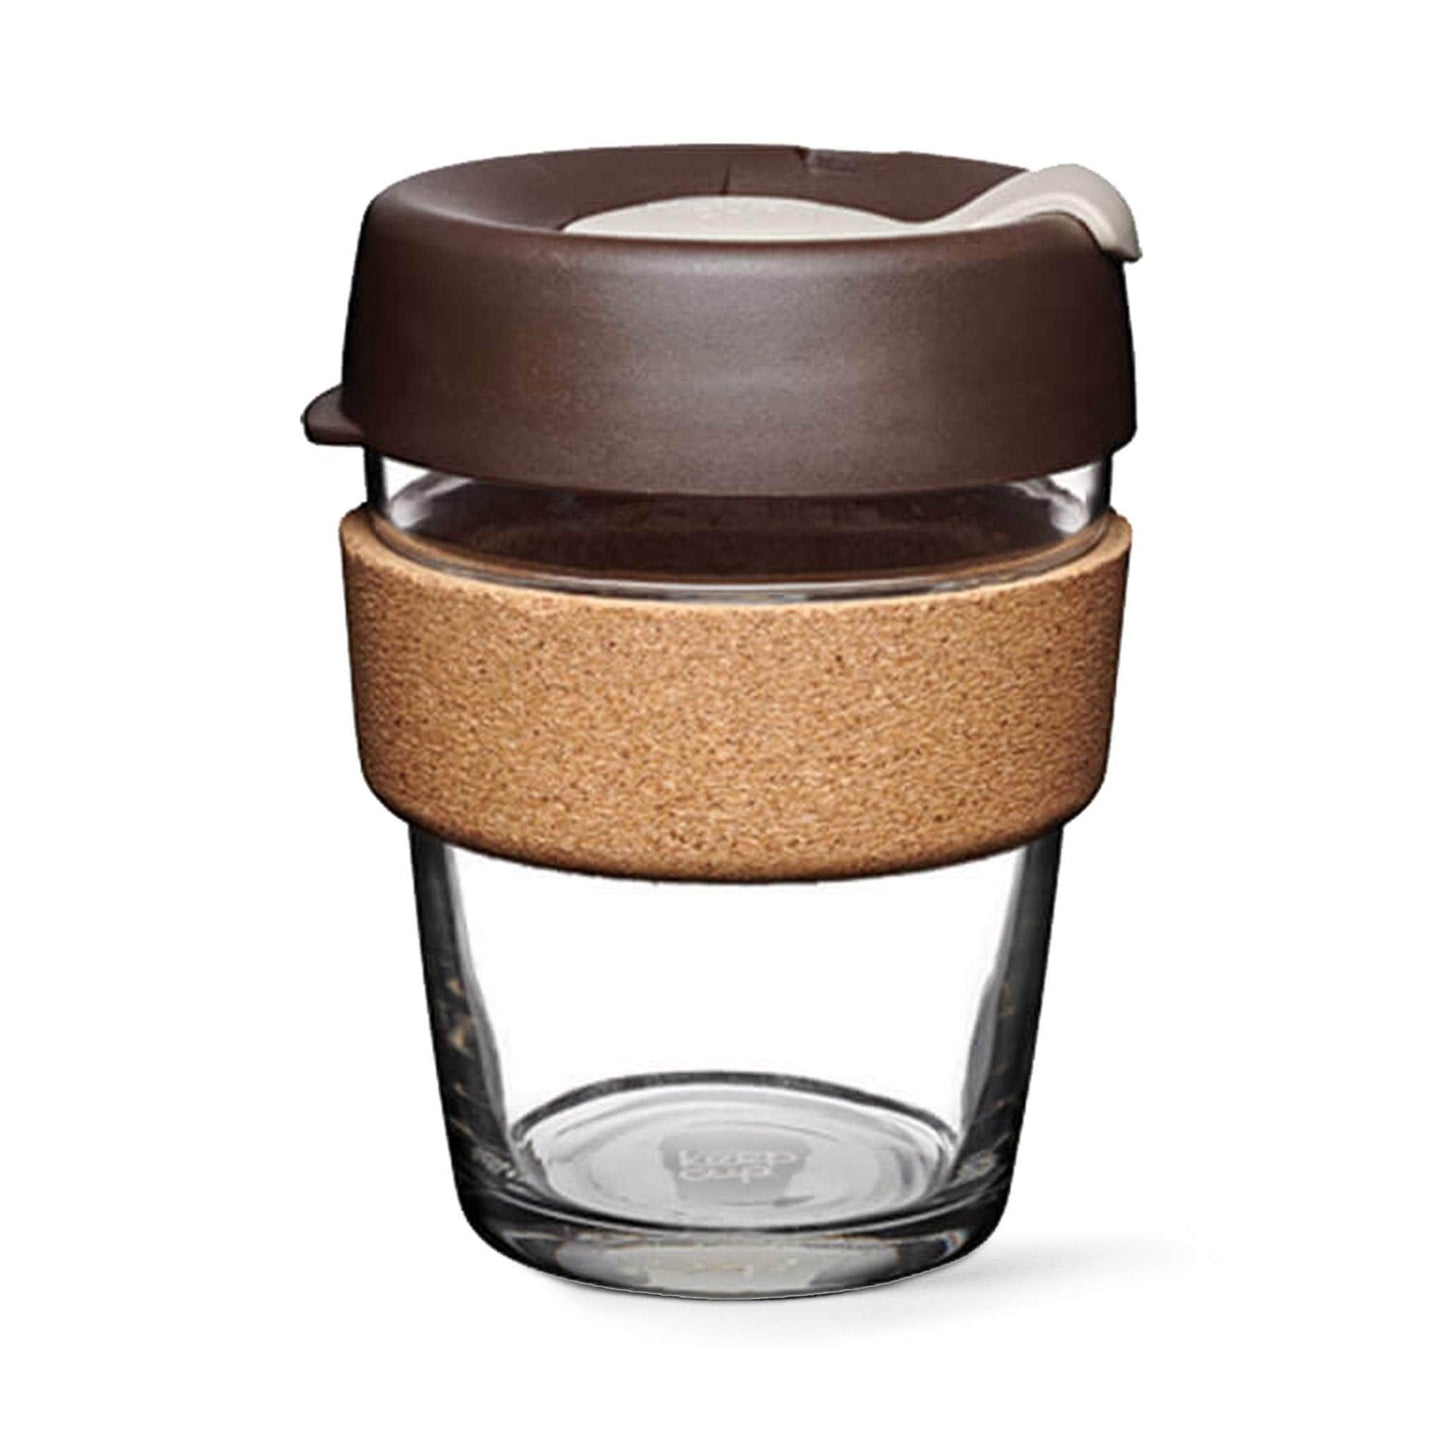 Keepcup Brew Cork Coffee Cups Keepcup Brew 12oz Glass Coffee Cup With Cork Band - Almond